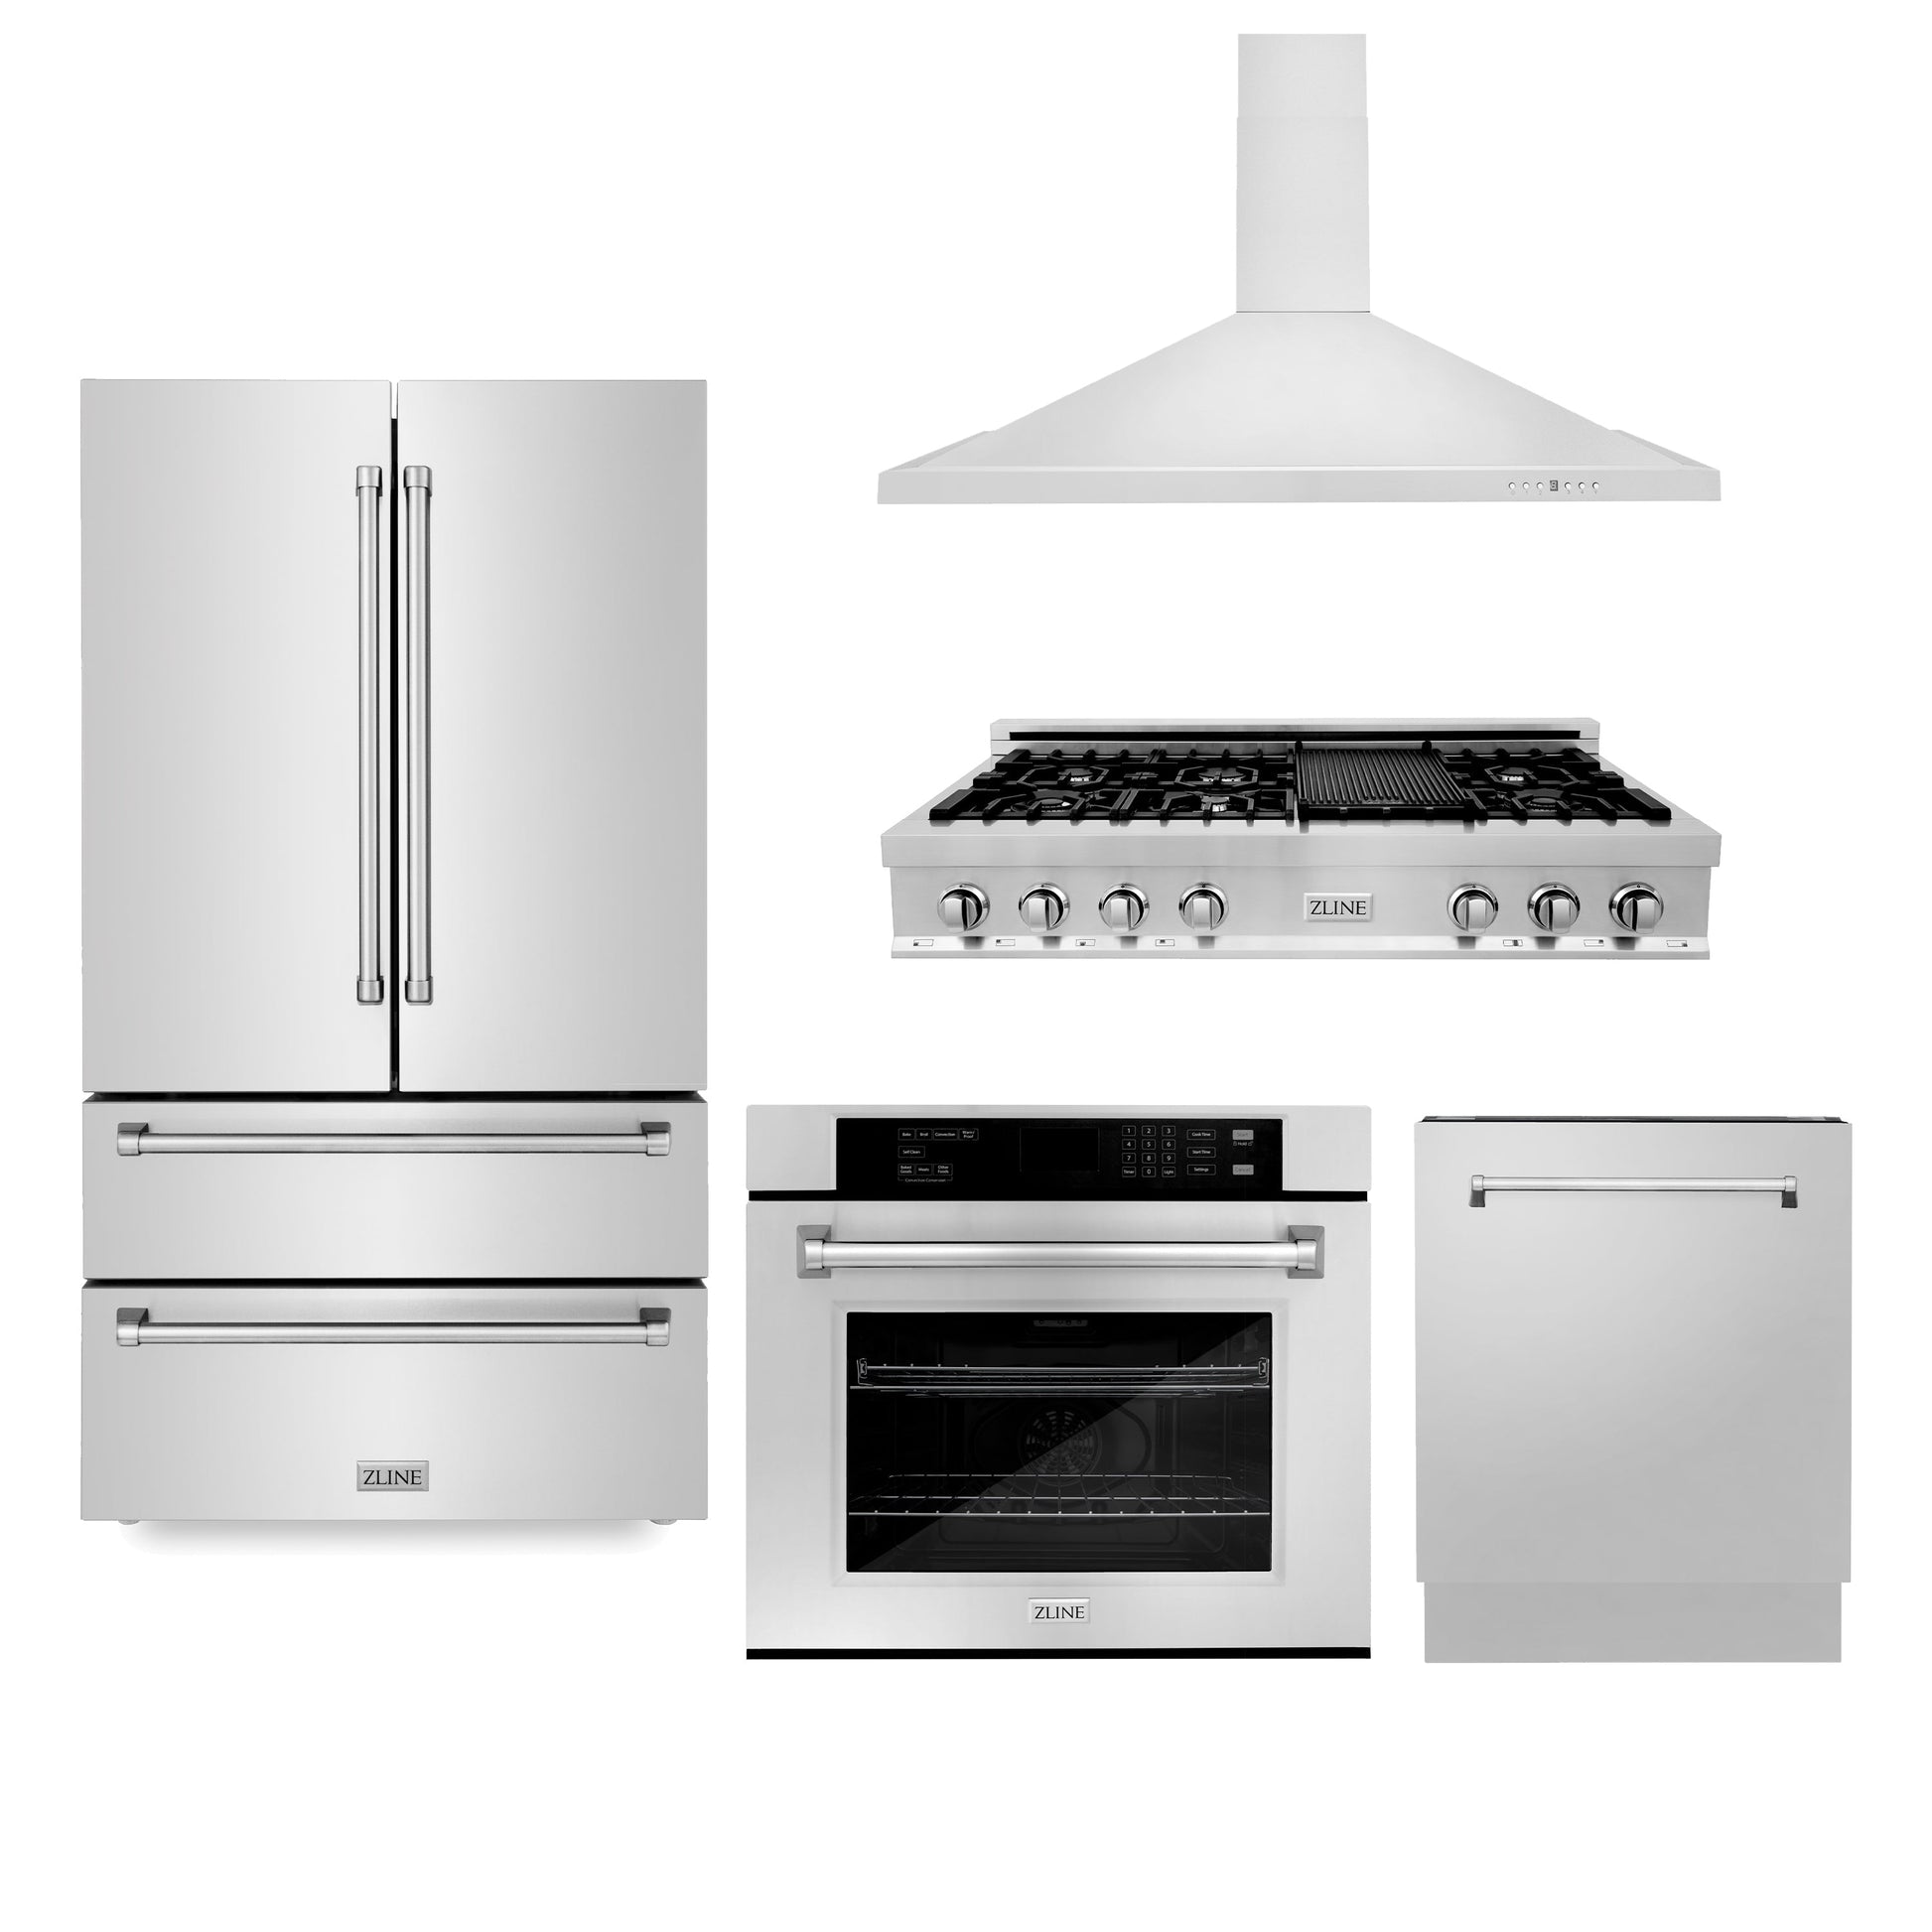 ZLINE 5-Appliance Kitchen Package with Stainless Steel Refrigeration, 48" Rangetop, 48" Range Hood, 30" Single Wall Oven, and 24" Tall Tub Dishwasher